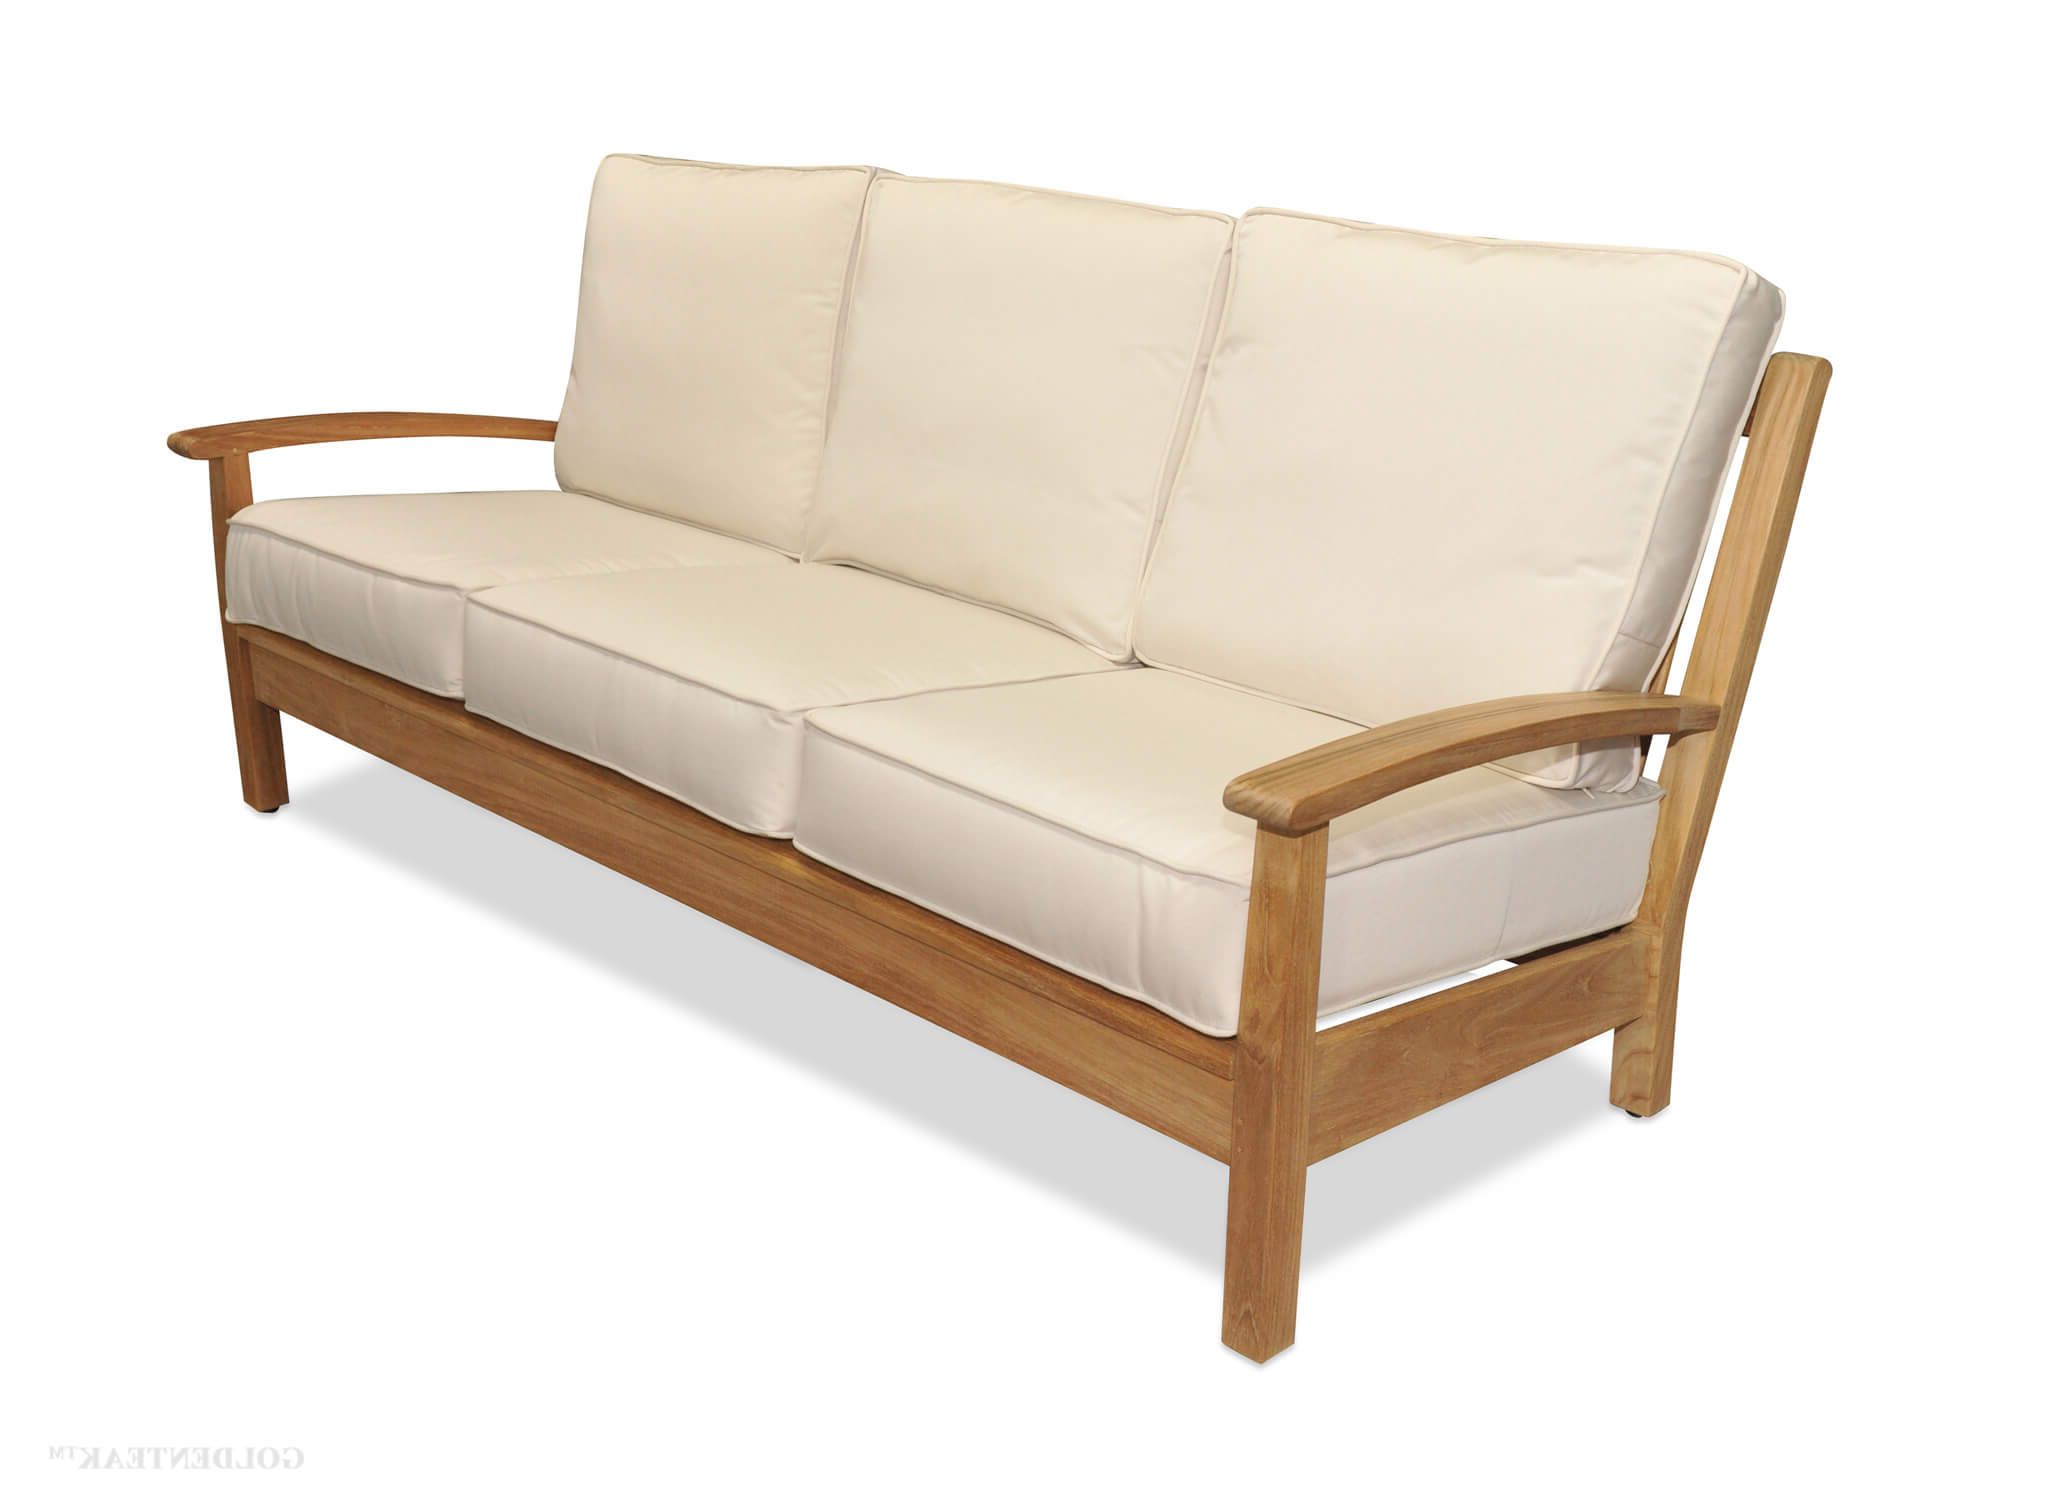 Brunswick Teak Loveseats With Cushions Intended For Recent Gebraucht Couchtisch Patio Sofas Sofa Teak Danish Cushions (View 16 of 20)